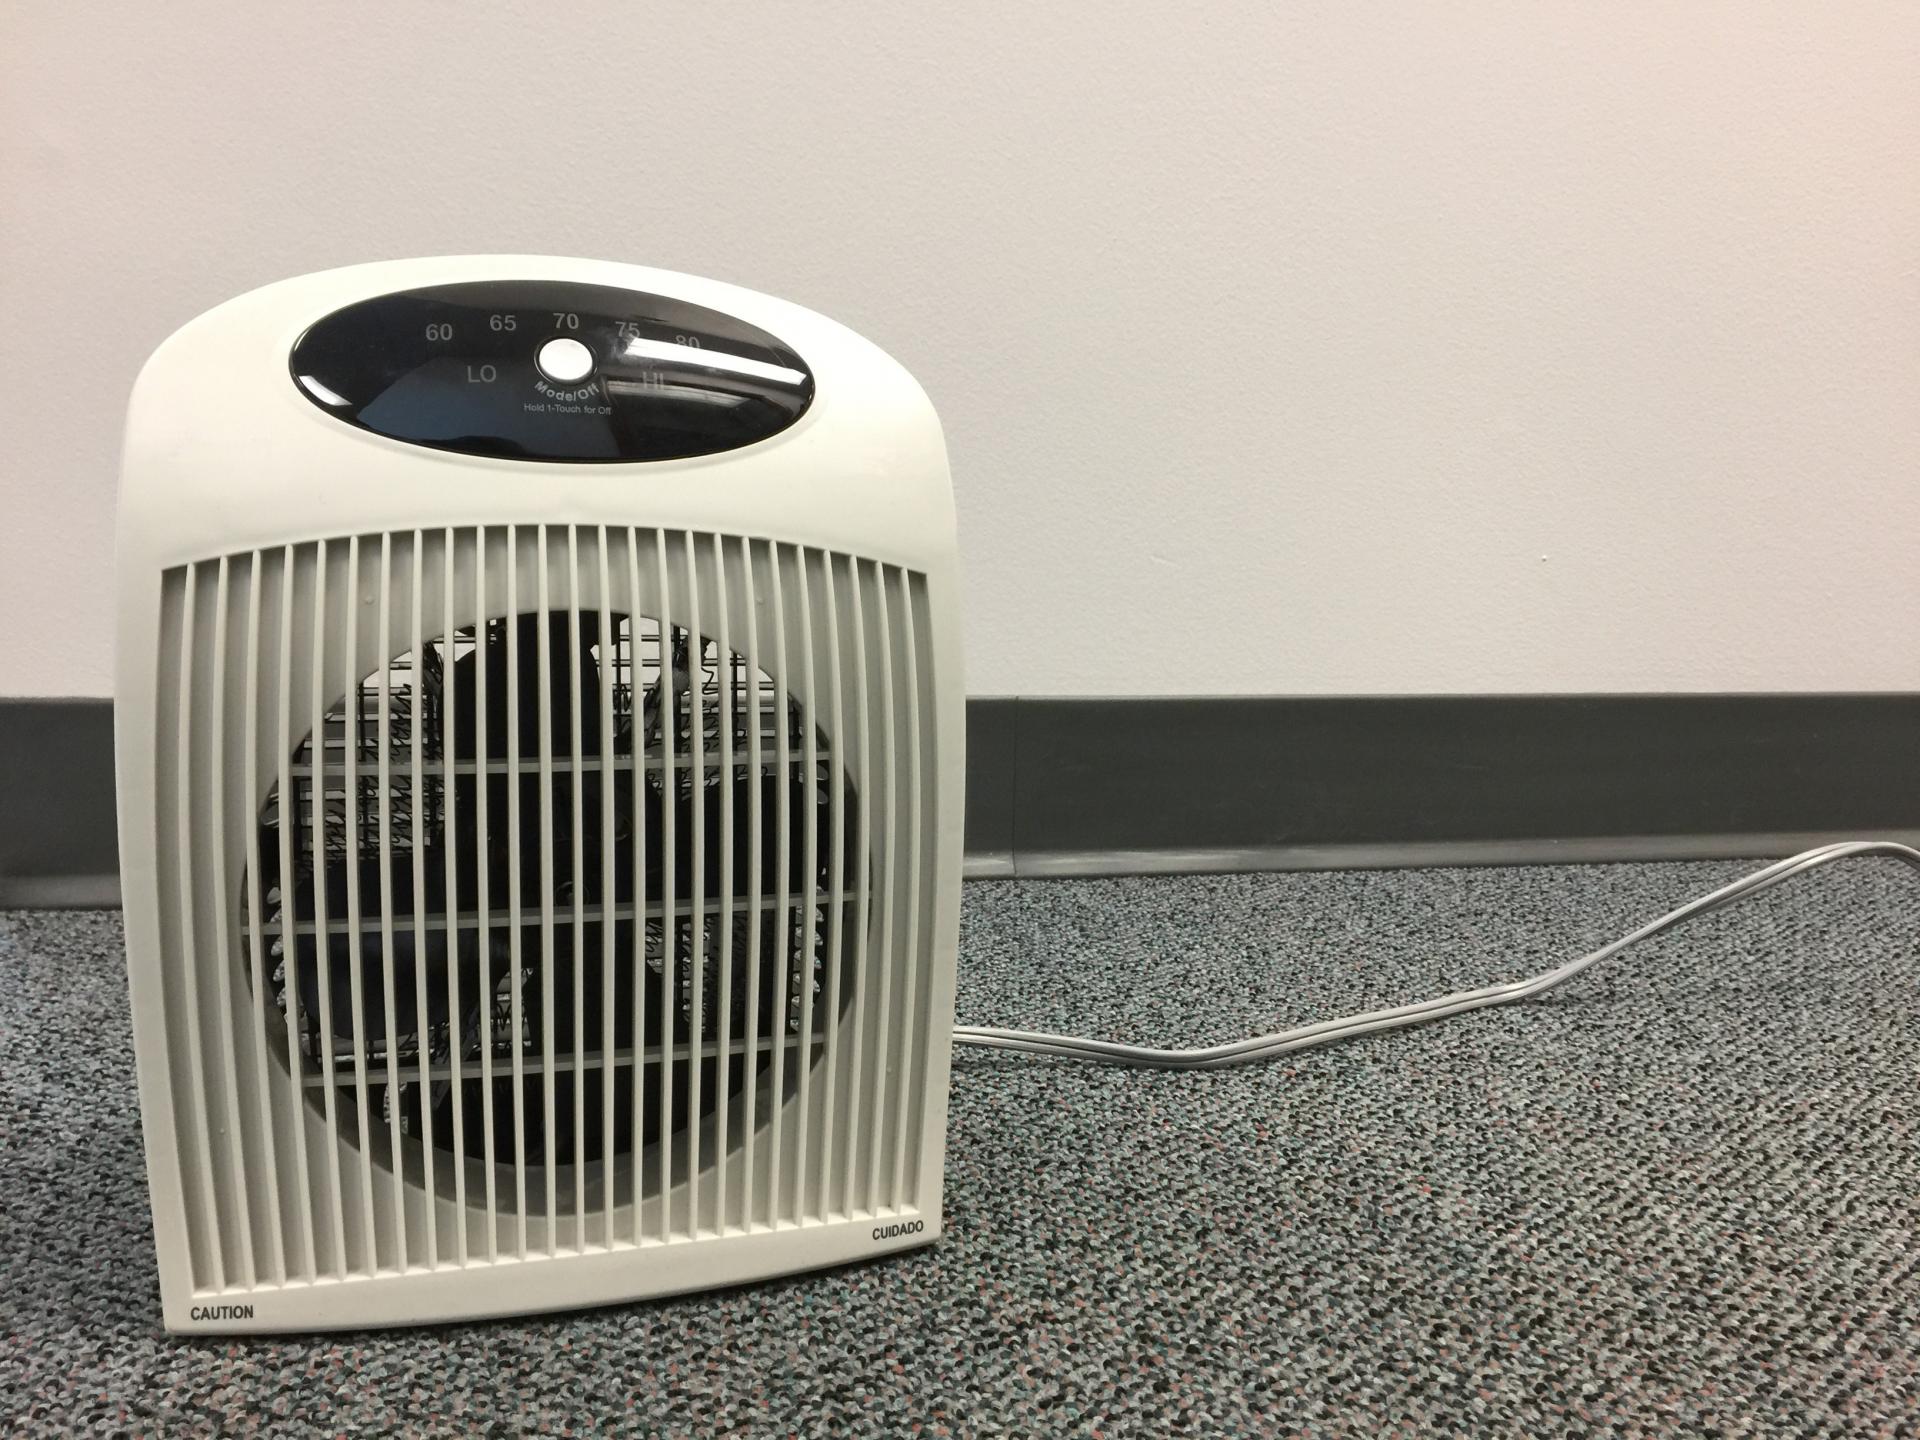 Space heaters cause majority of fatal house fires, 2018-01-16